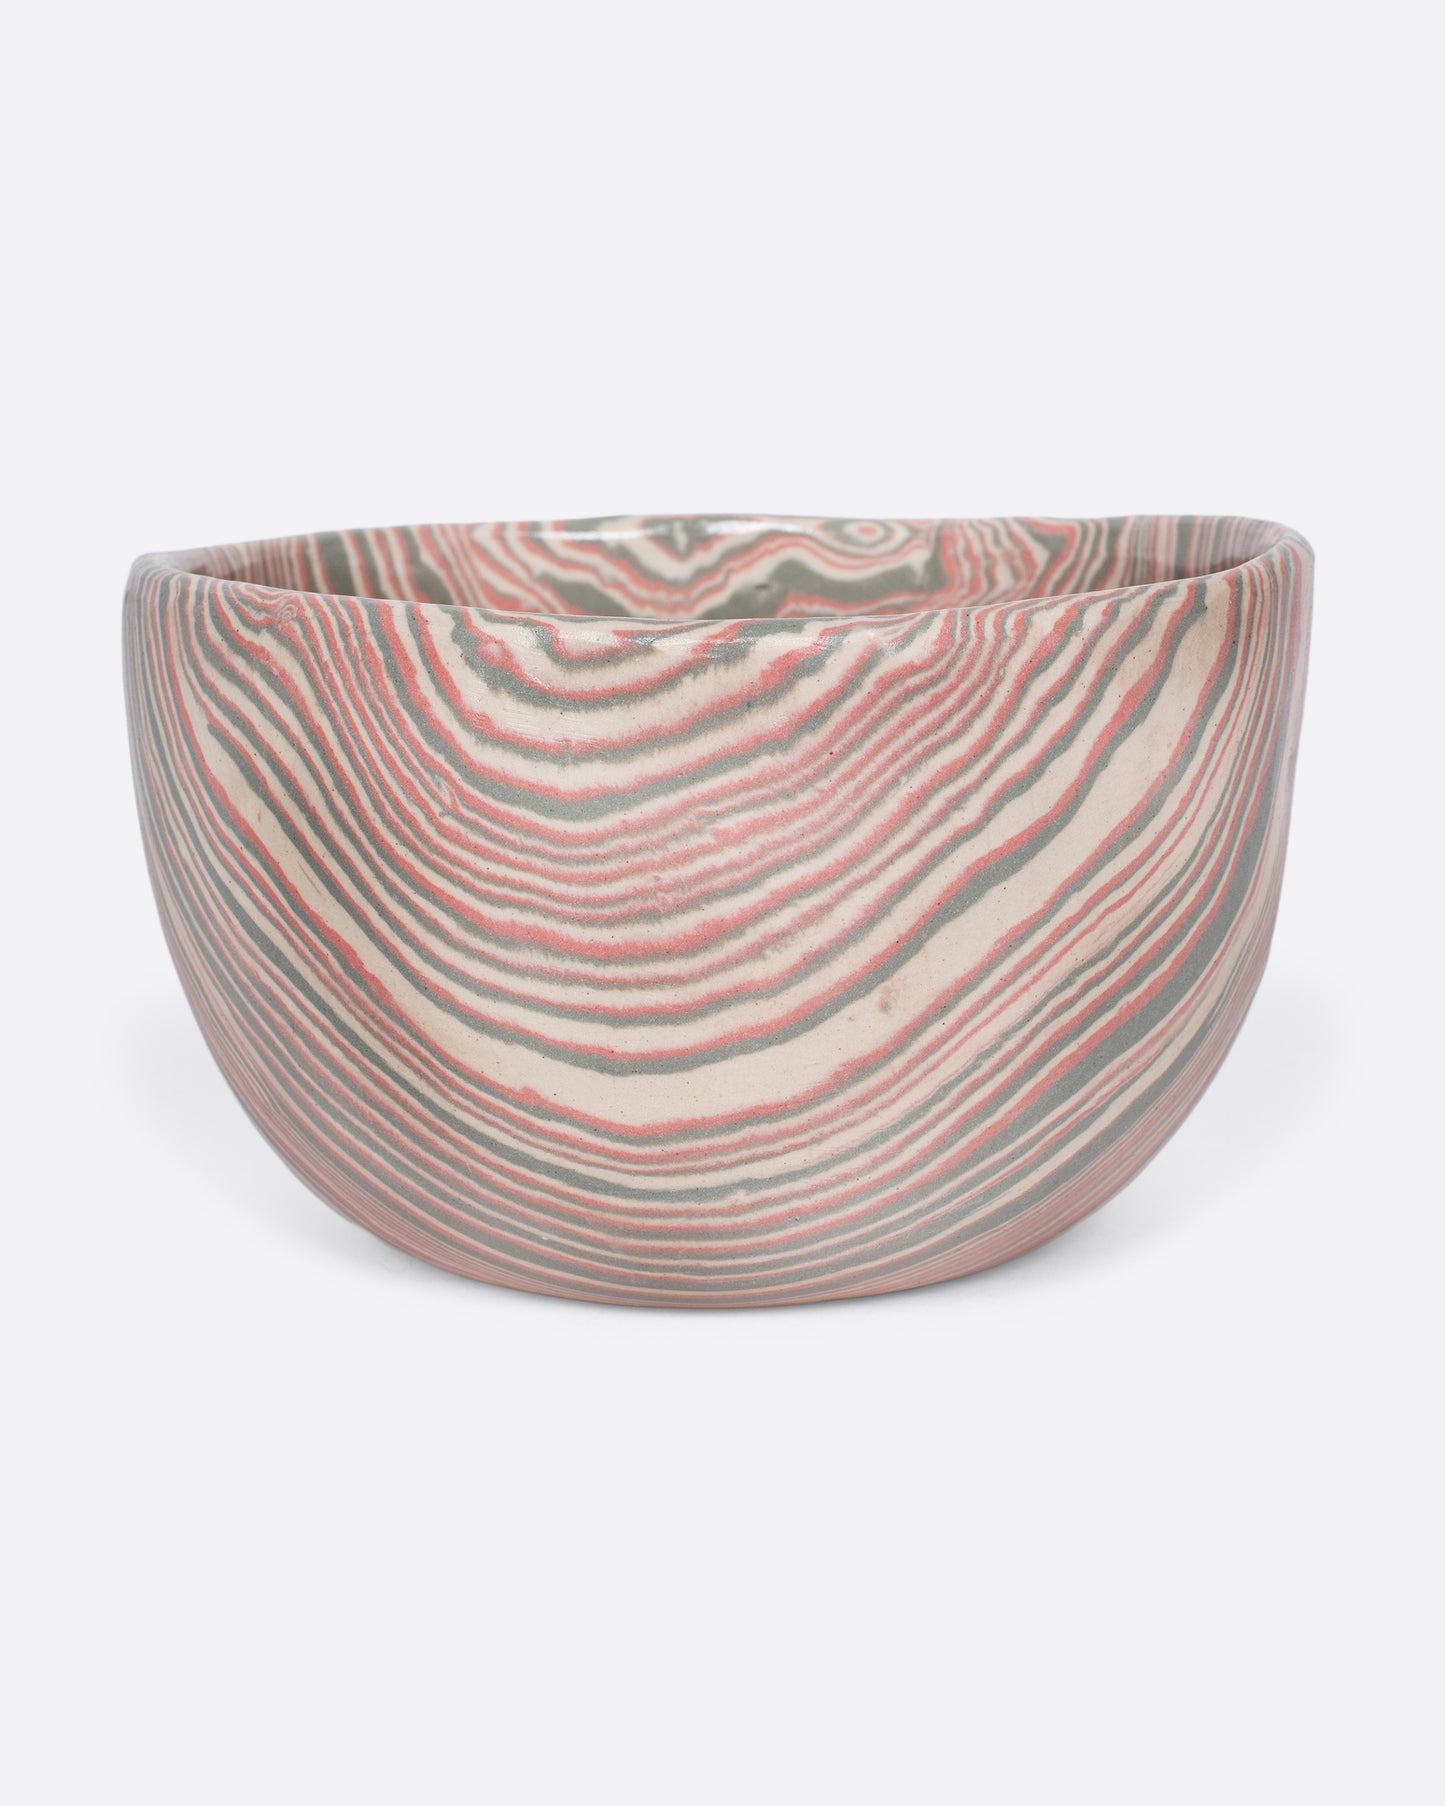 These small-batch ceramic bowls are made with a traditional Japanese nerikomi technique that creates an intricate, marbled design by layering and compressing clay. This timeless style feels plucked from desert sandstone with flowing hues of pink, white, and grey. Available in small, medium, and large sizes.